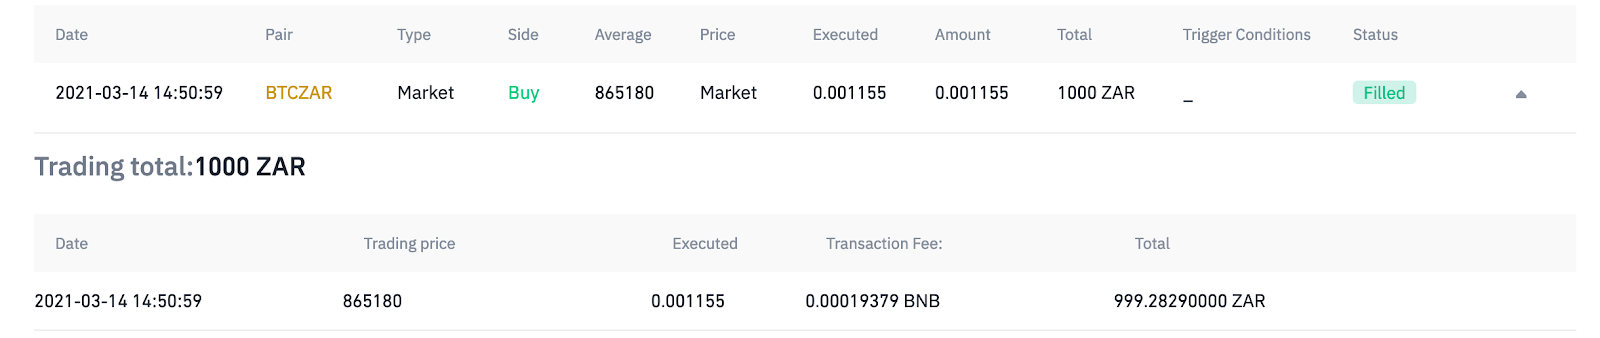 Screenshot of the purchase order of Bitcoin from Binance.